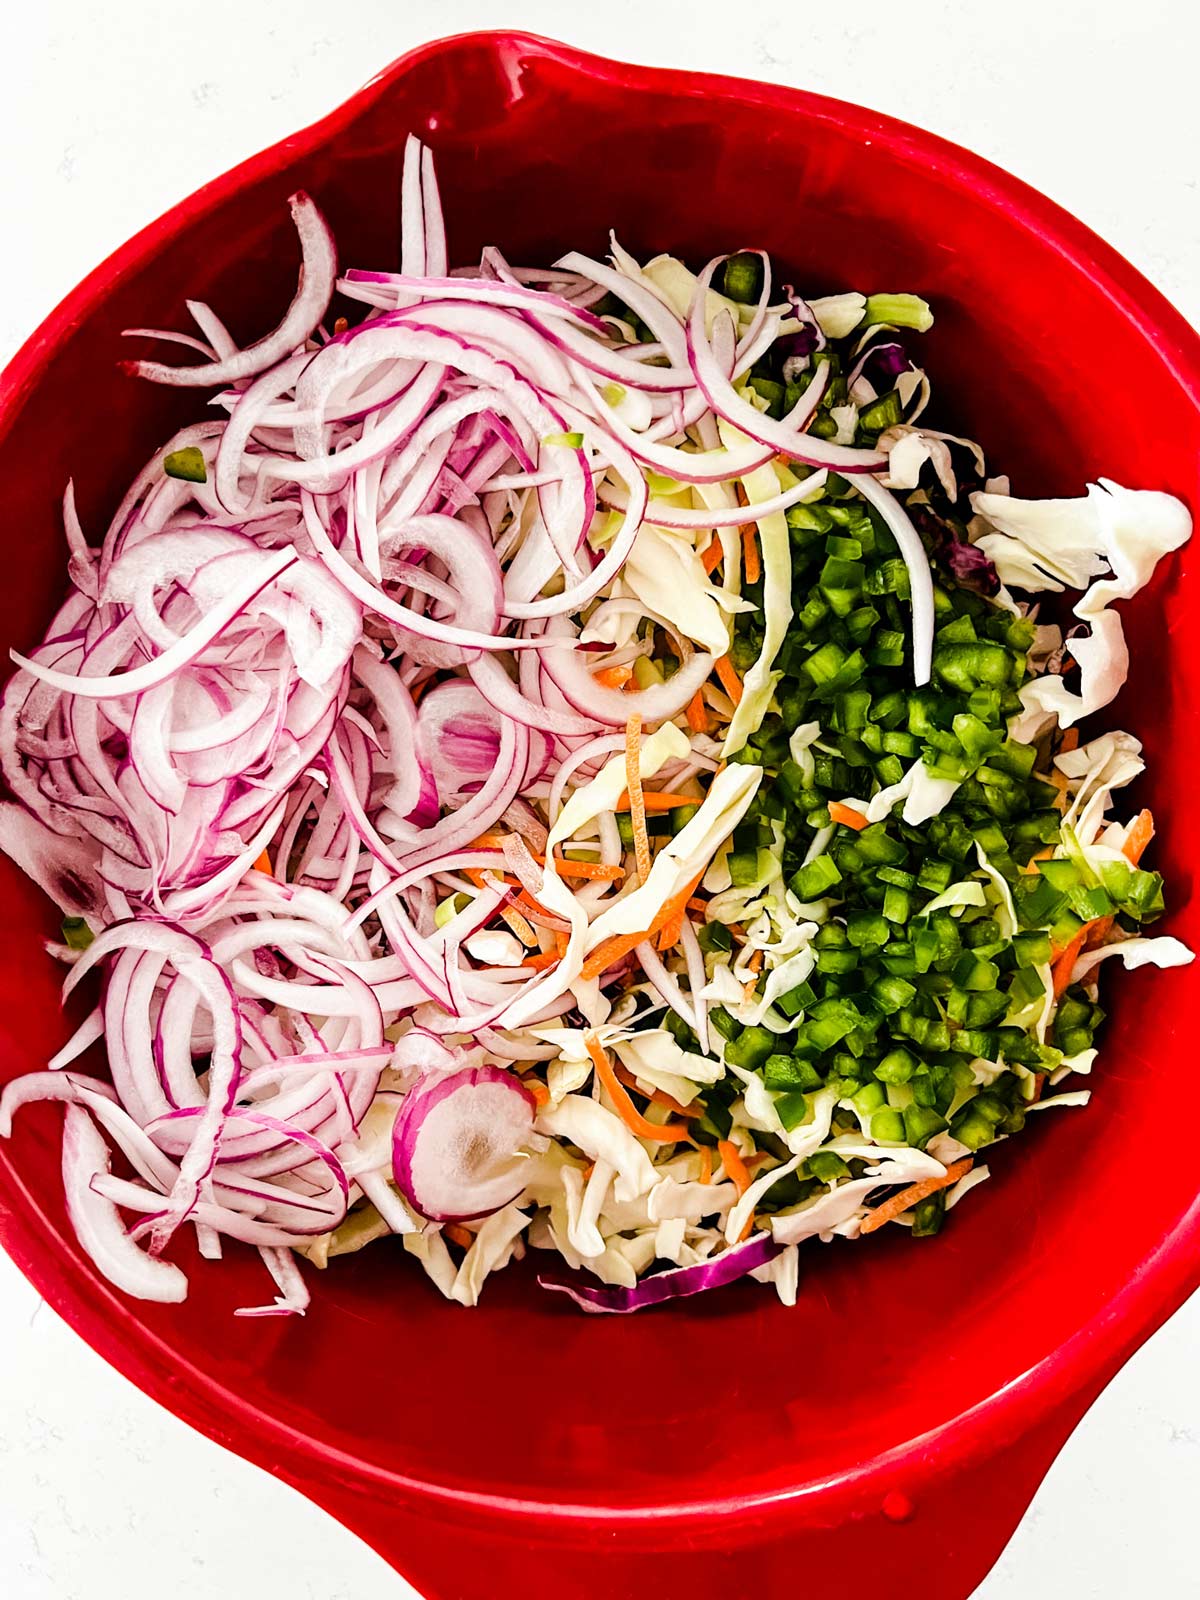 Overhead photo of a bowl of coleslaw mix, jalapeno, and sliced red onion.